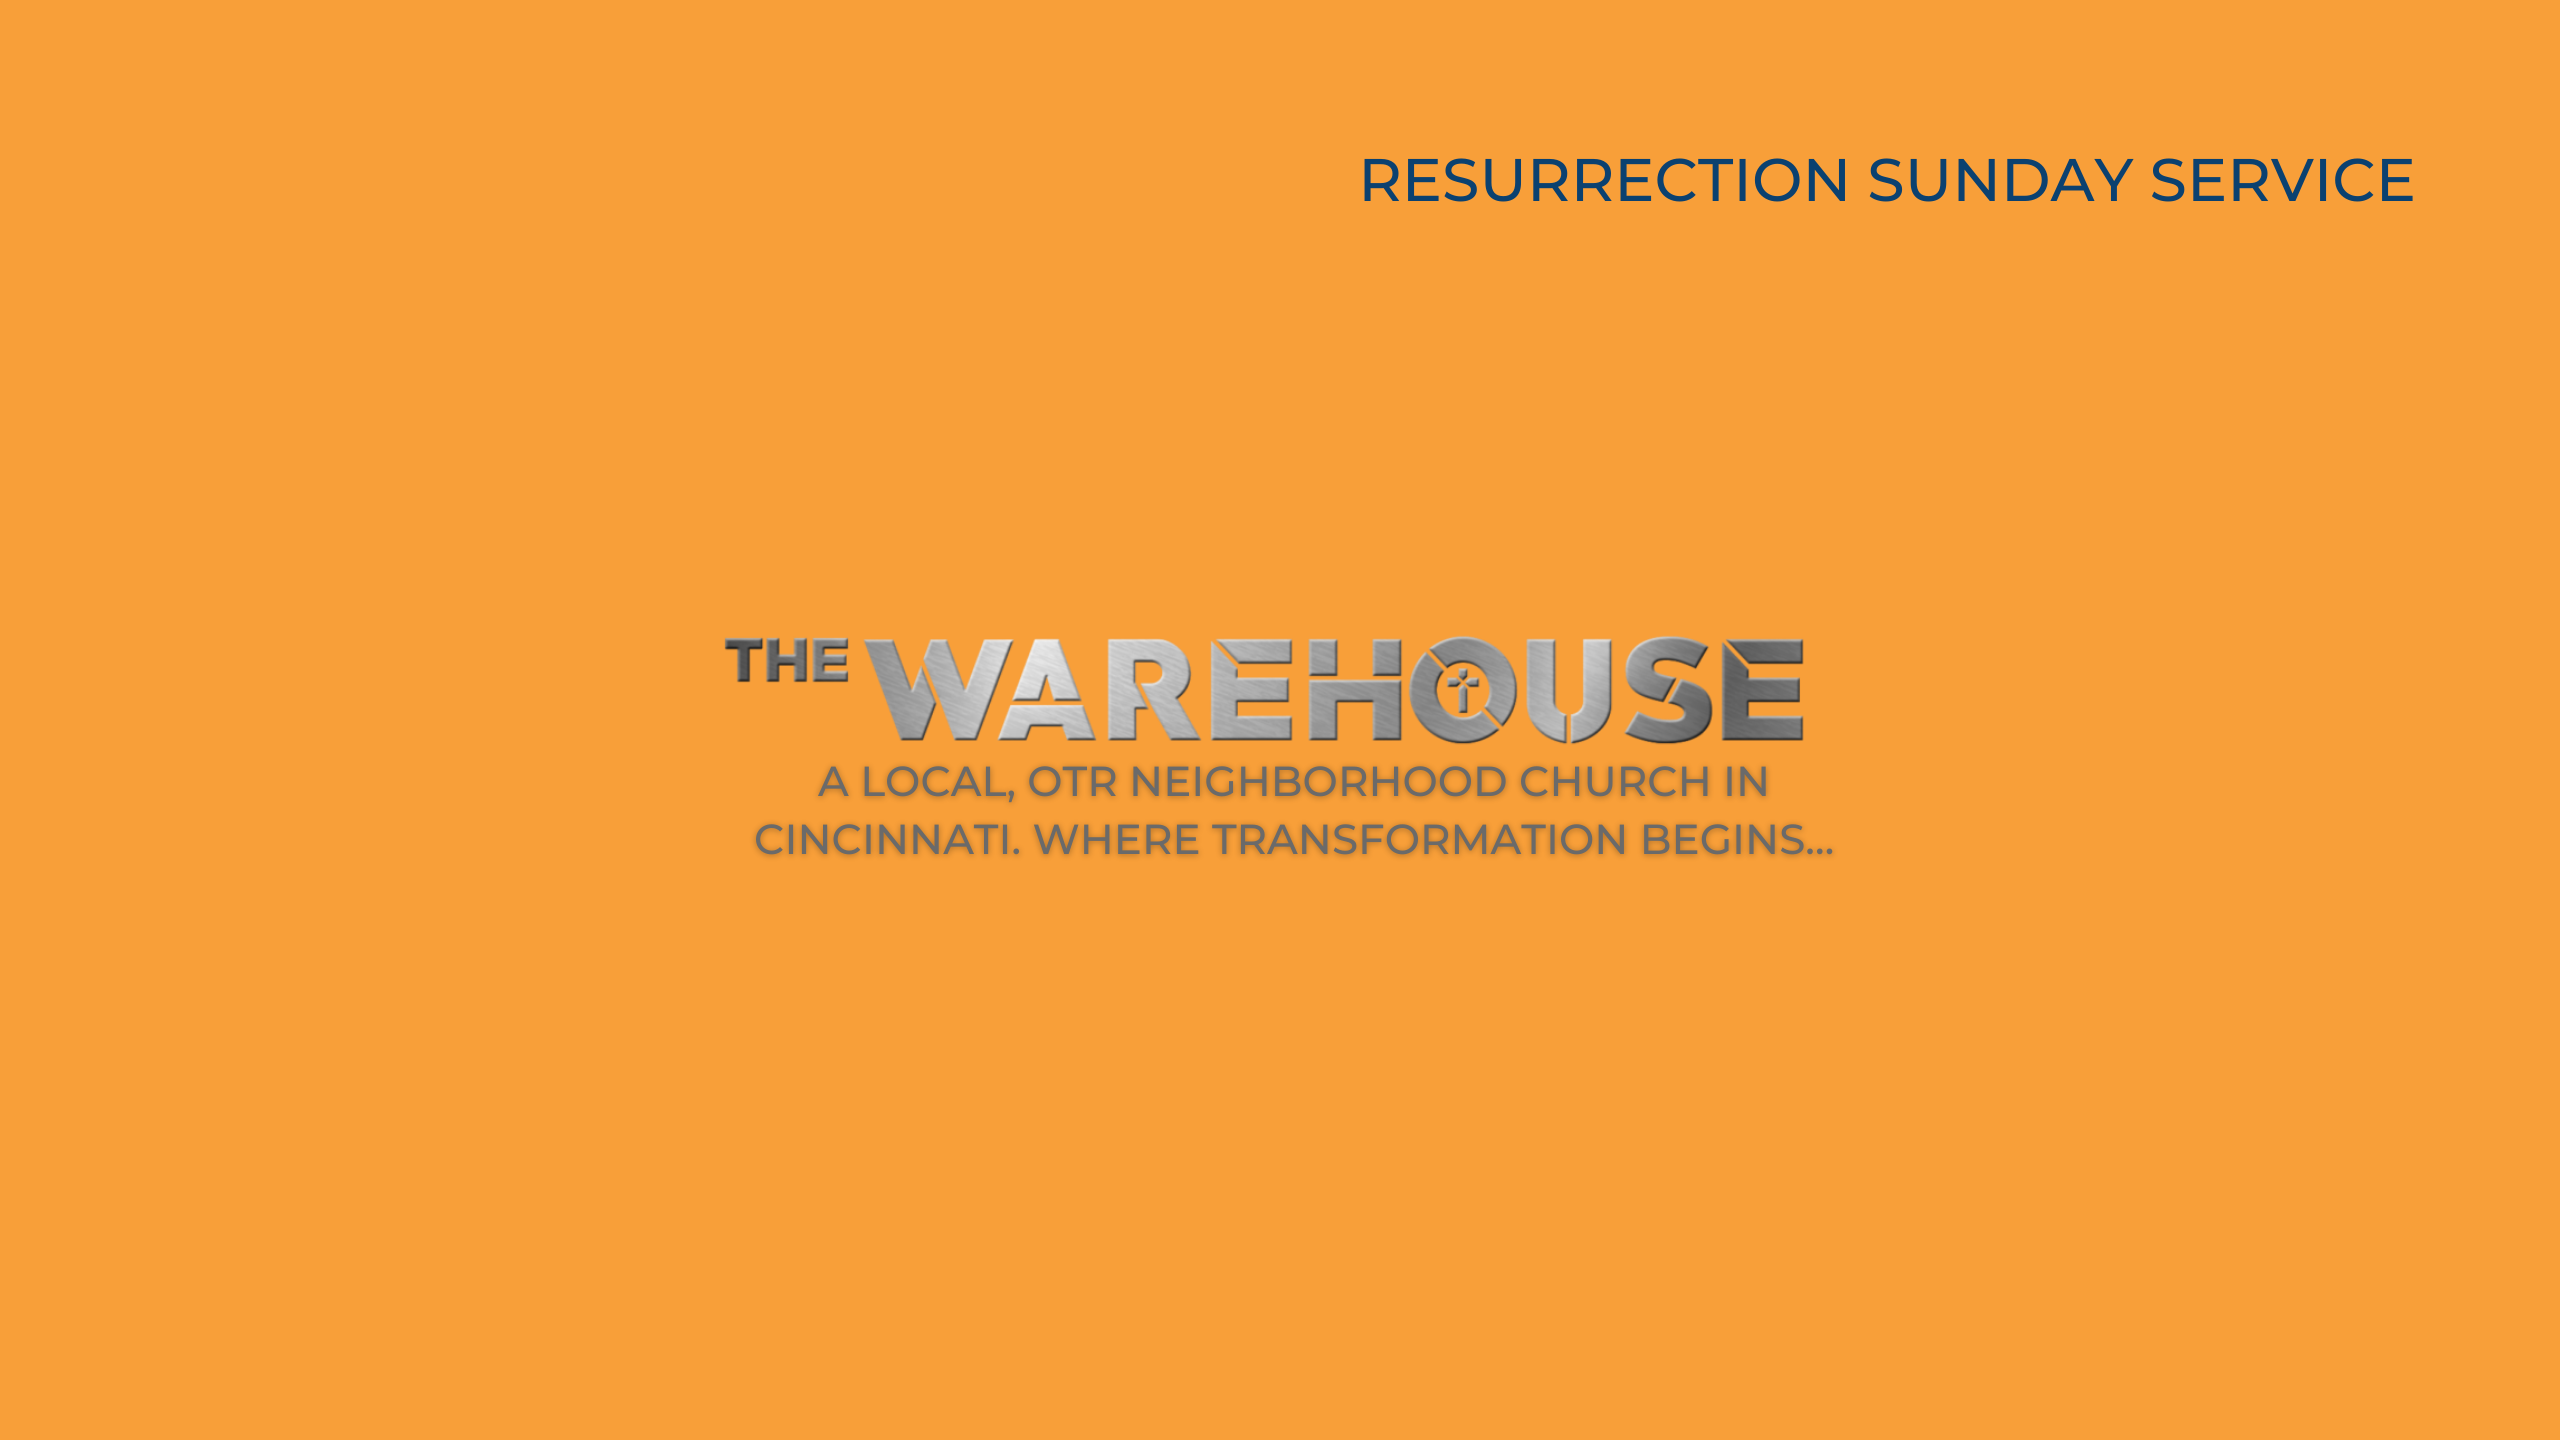 Find The Warehouse Church of Cincinnati's Over The Rhine on YouTube and listen to livestreams and full sermons